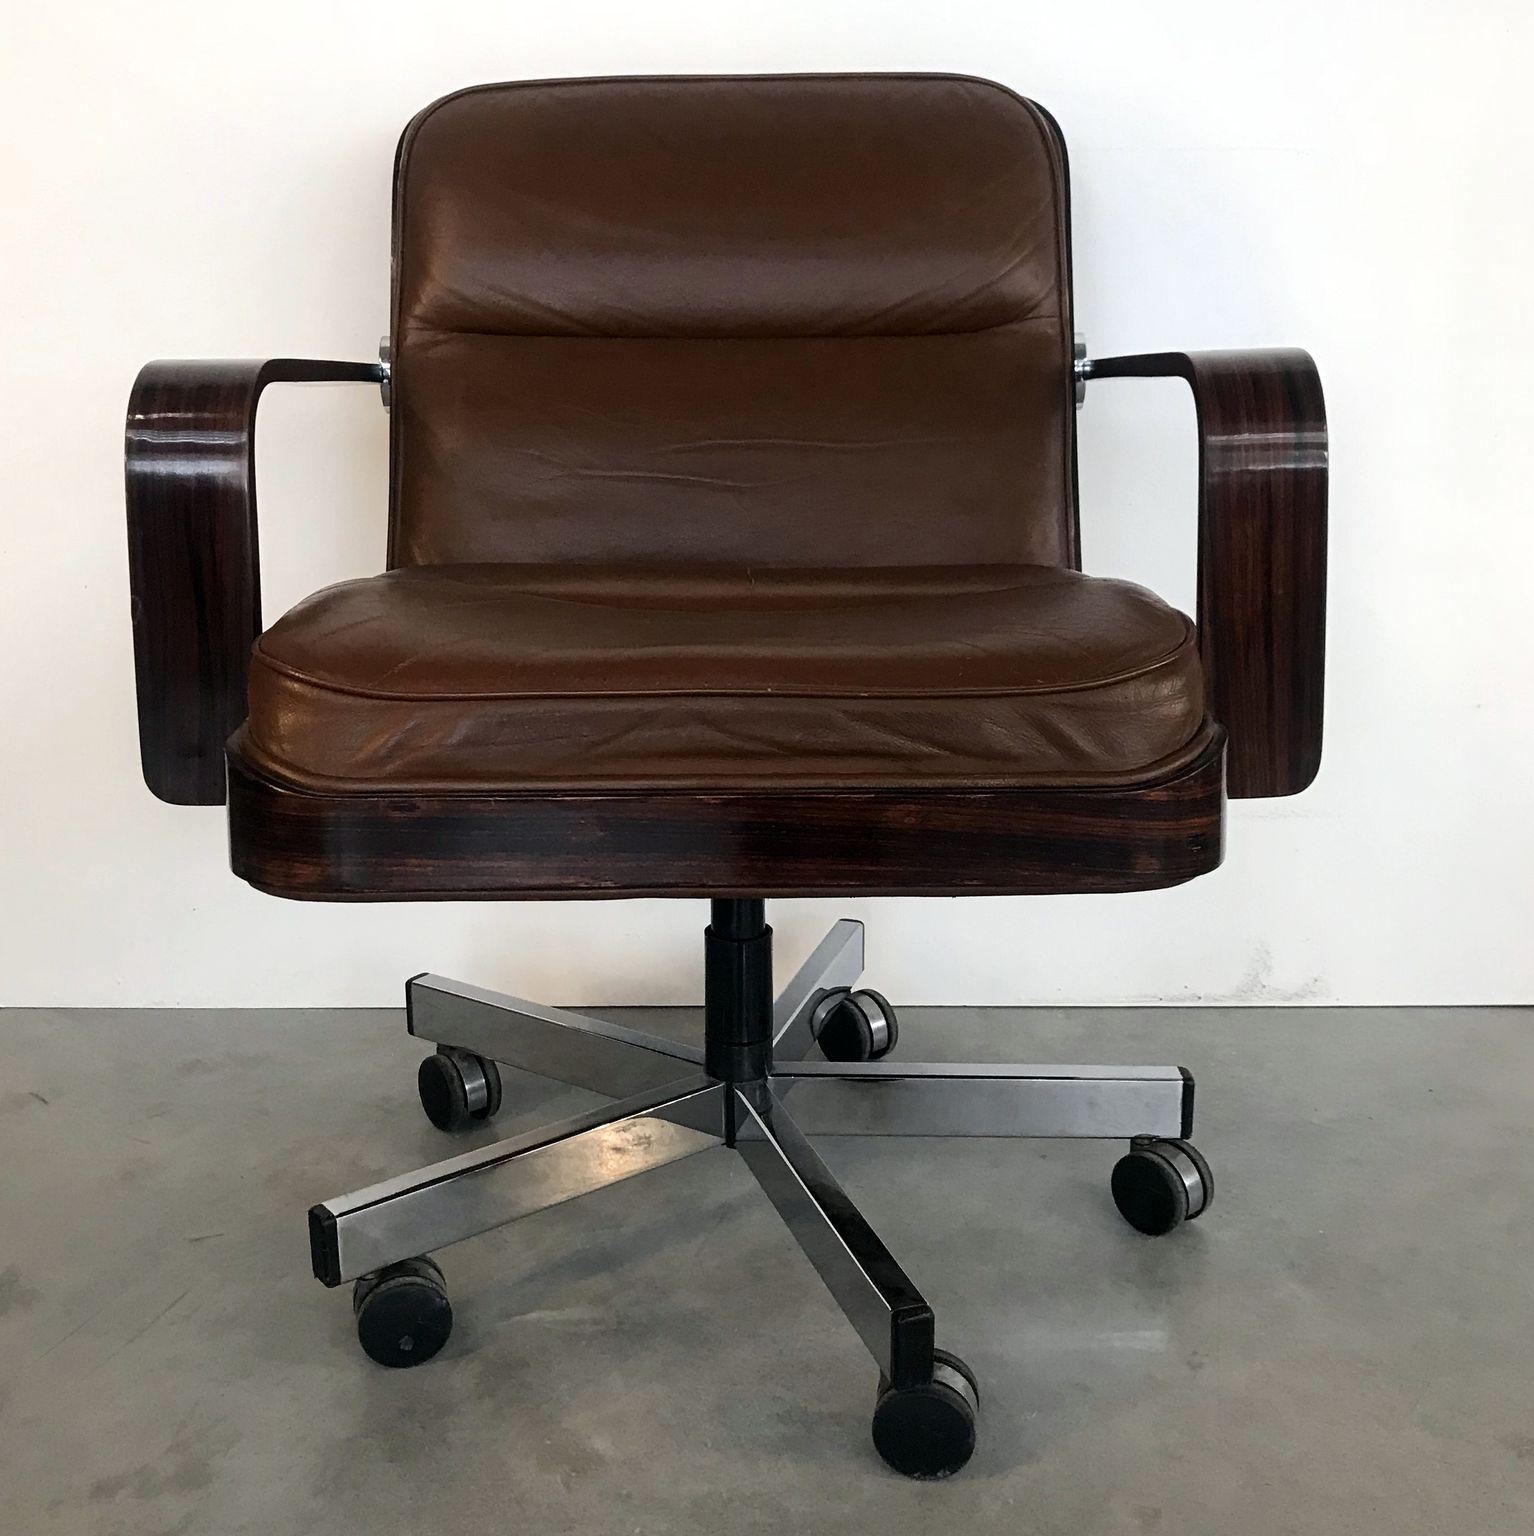 Beautiful chair is made of a brown leather seating with Macassar ebony frame and armrests on swivel chrome leg. Upholstered with original material.